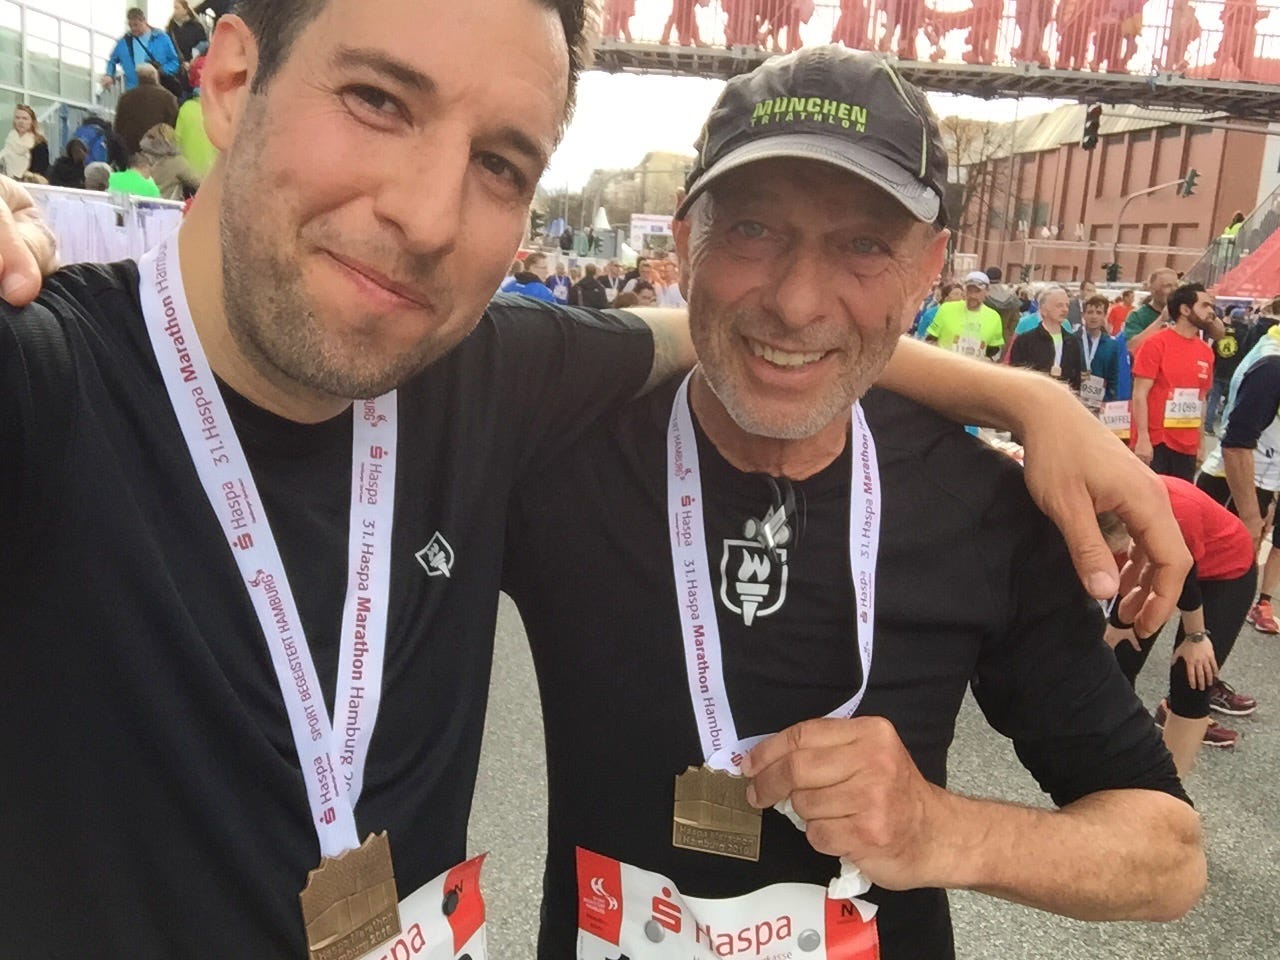 The author and his father at the finish line of the Hamburg Marathon, holding their medals in the camera